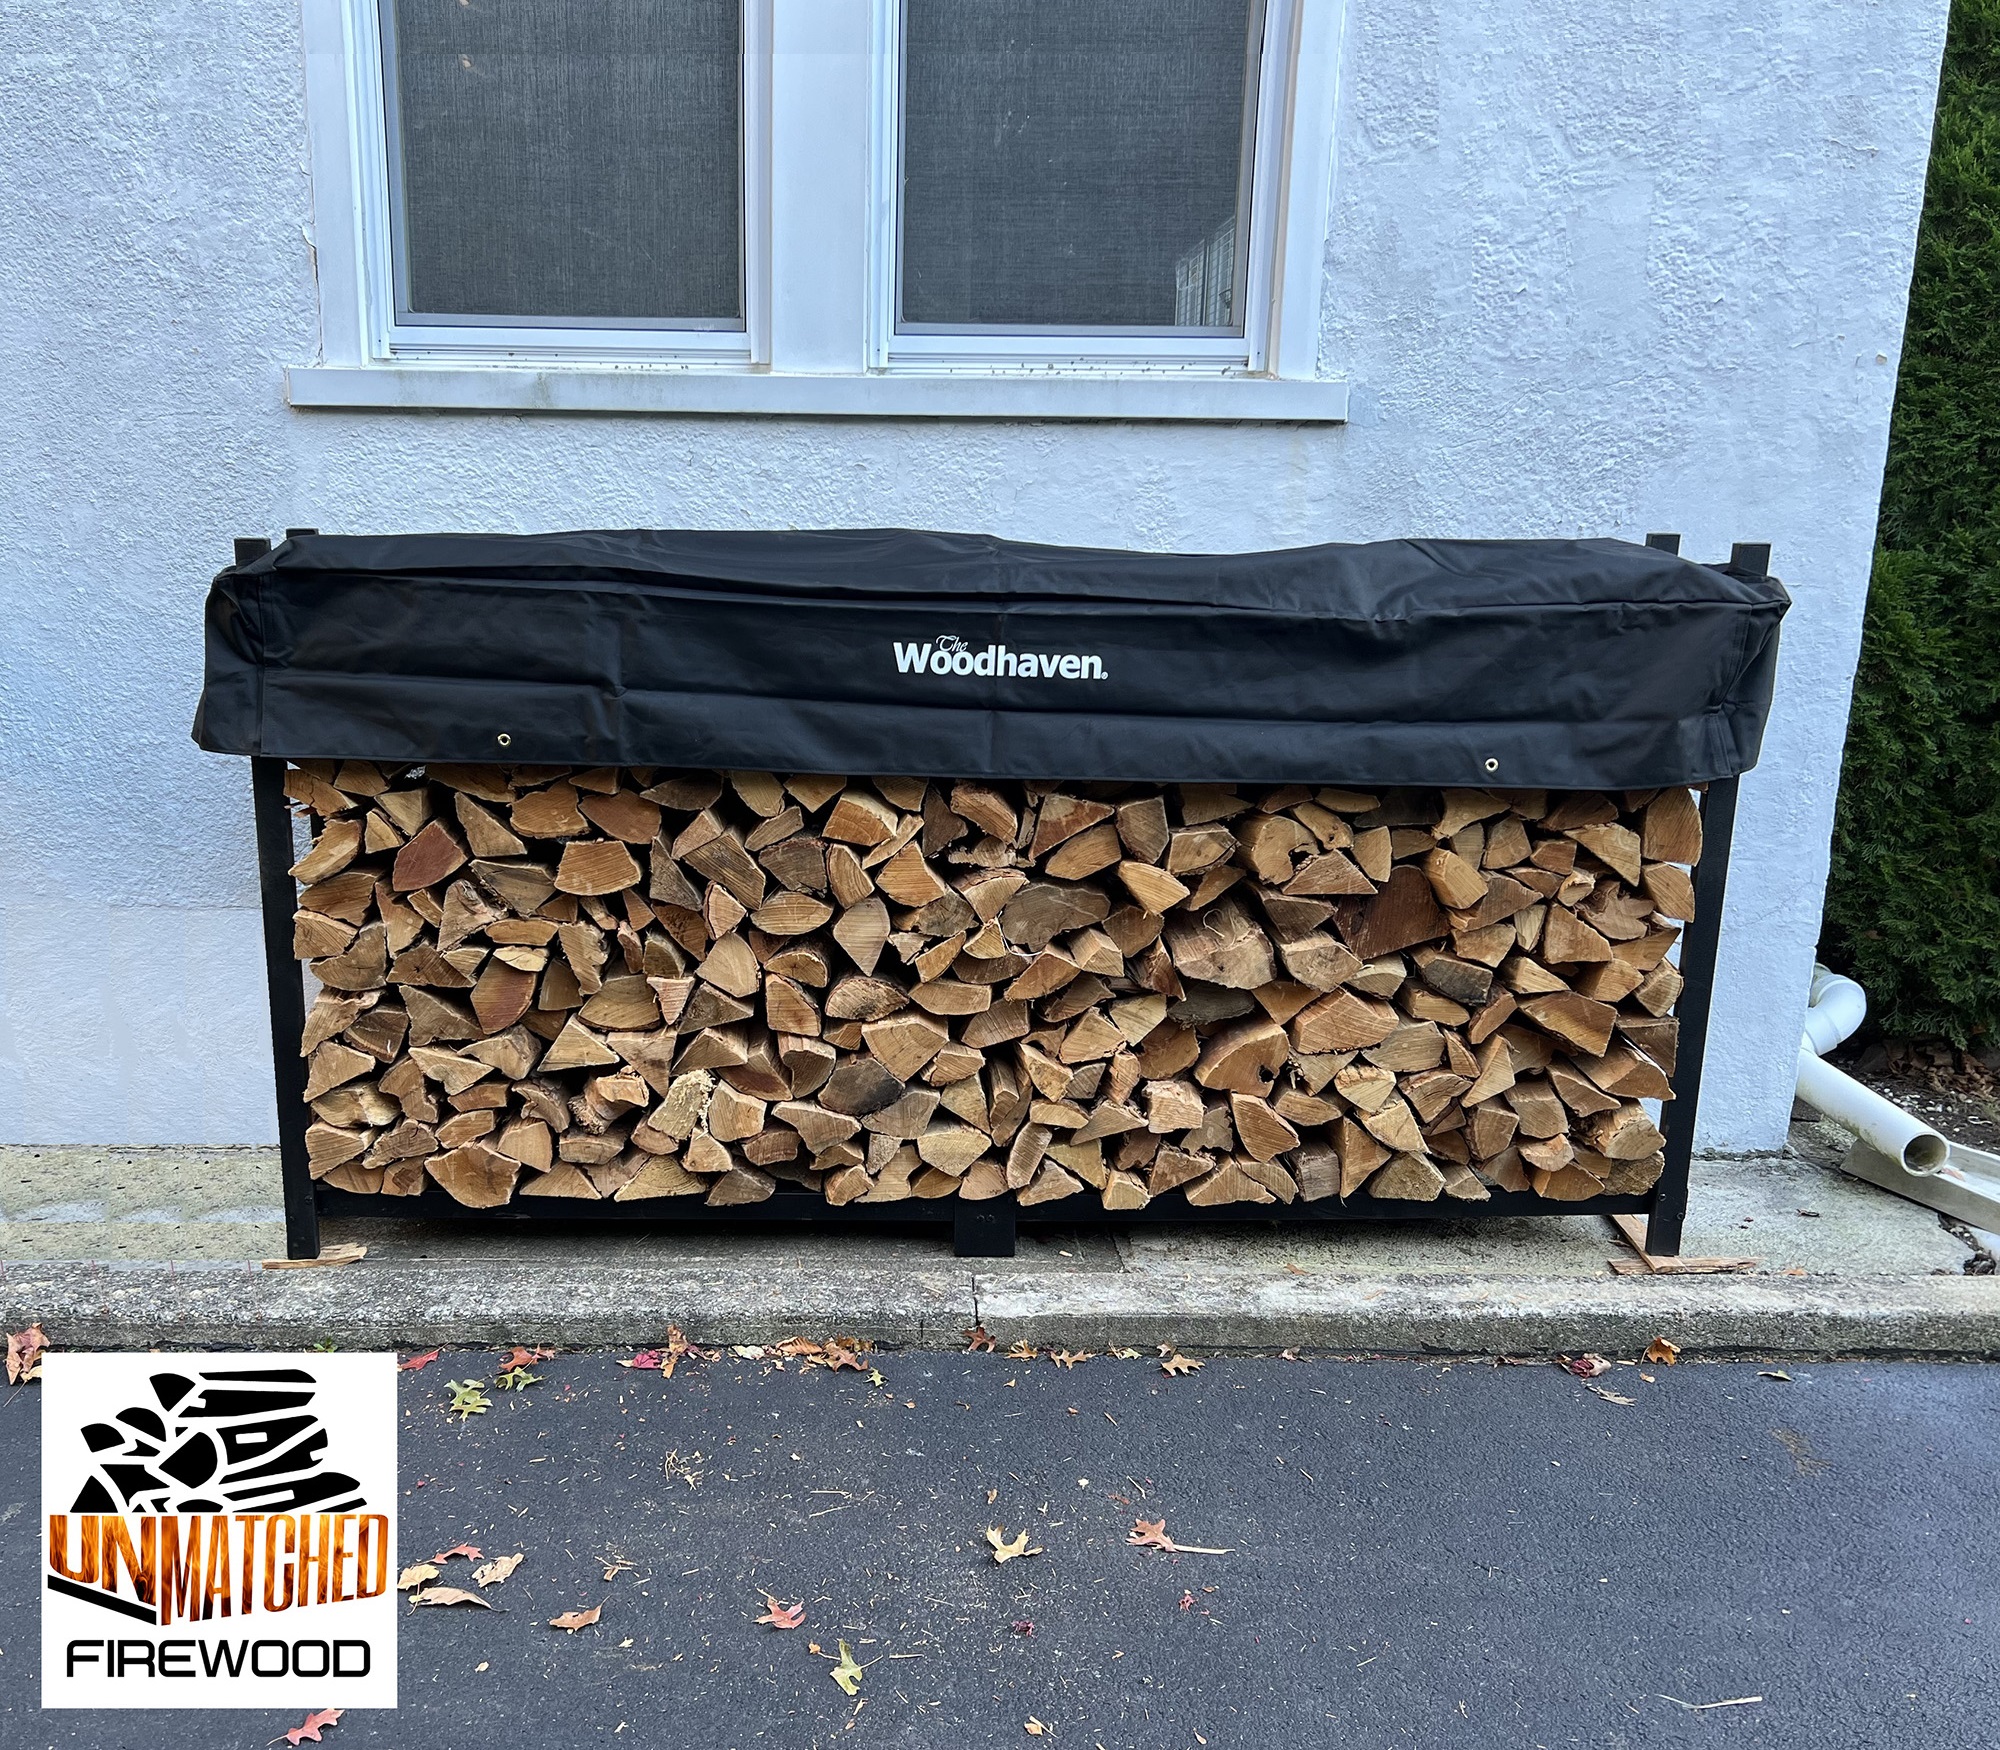 Unmatched Firewood: Fairfield Firewood